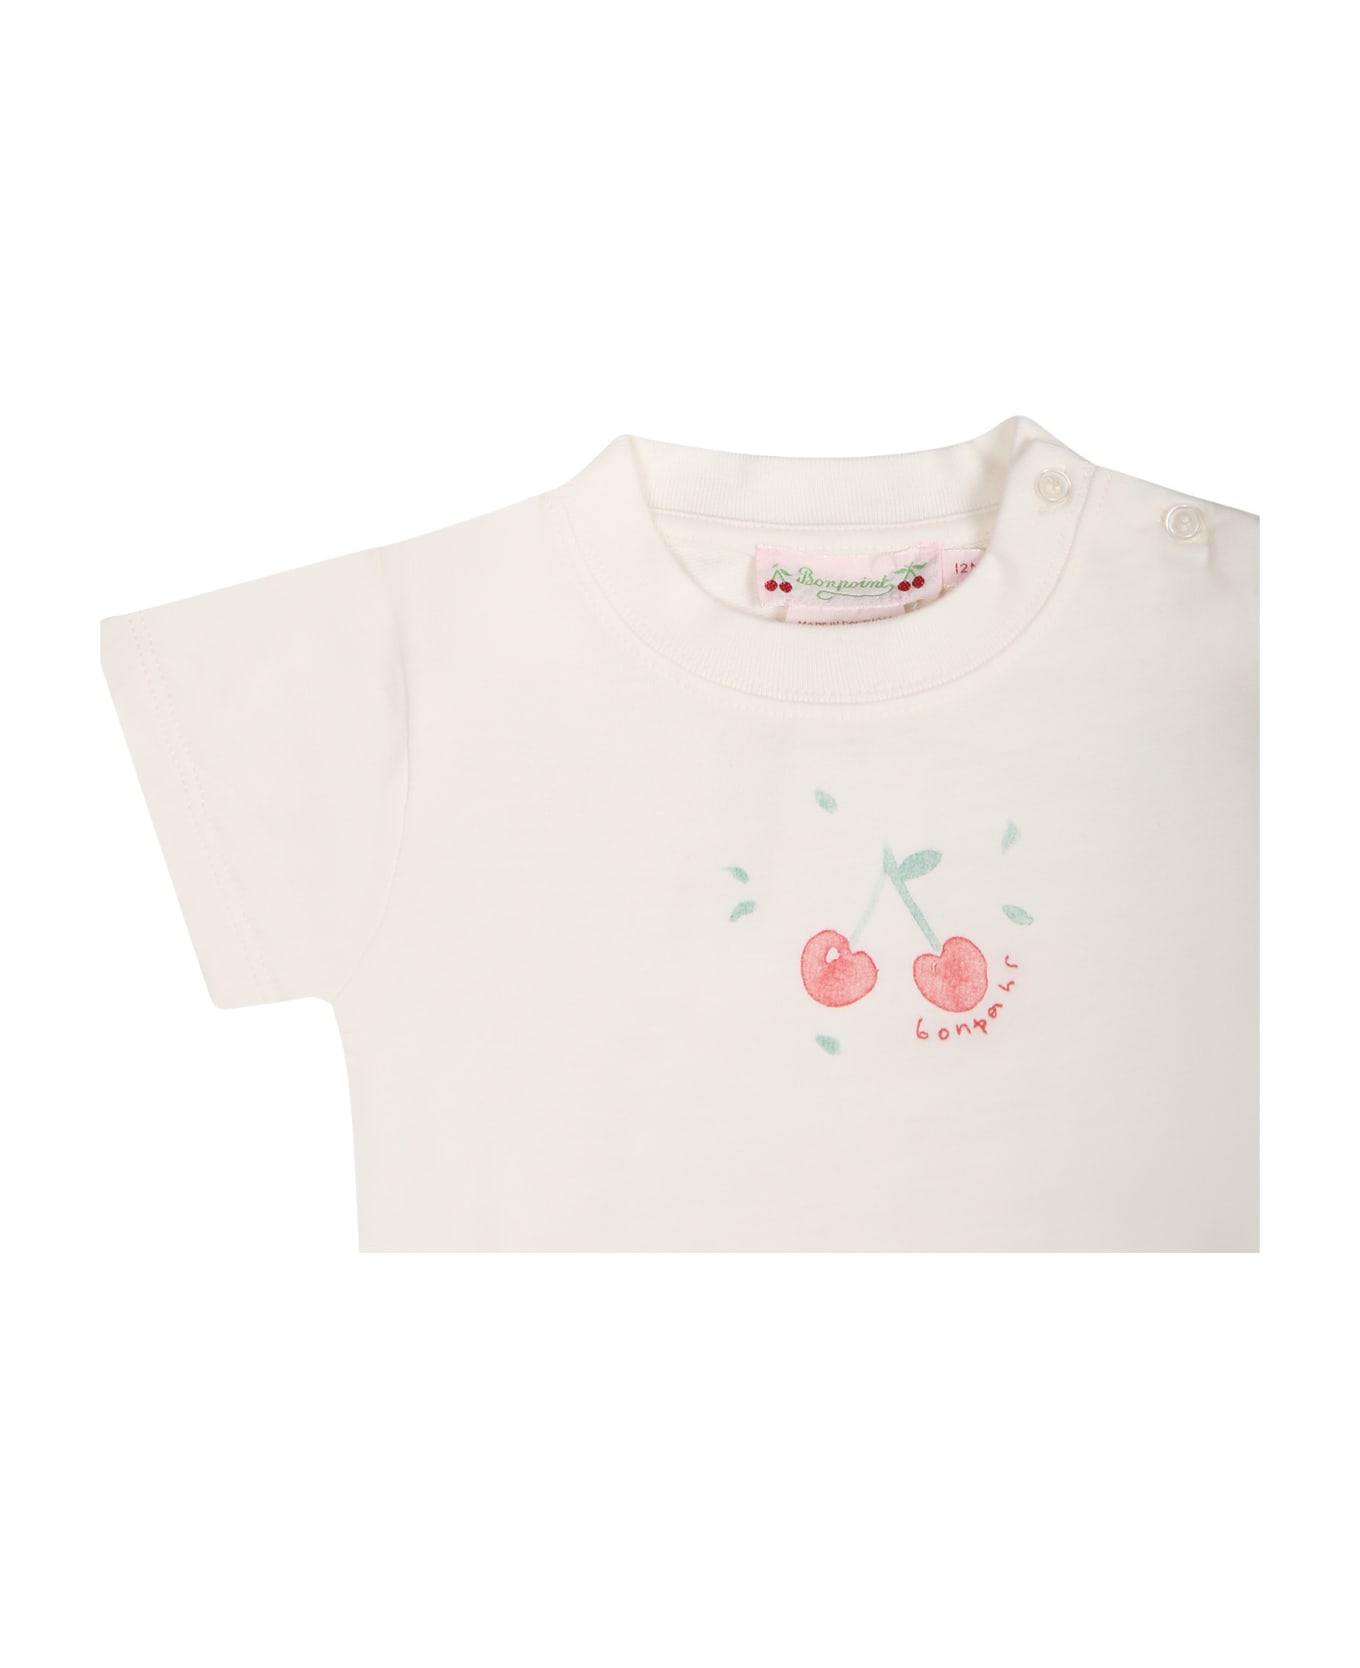 Bonpoint White Casual Dress For Girl With Cherries - White ウェア